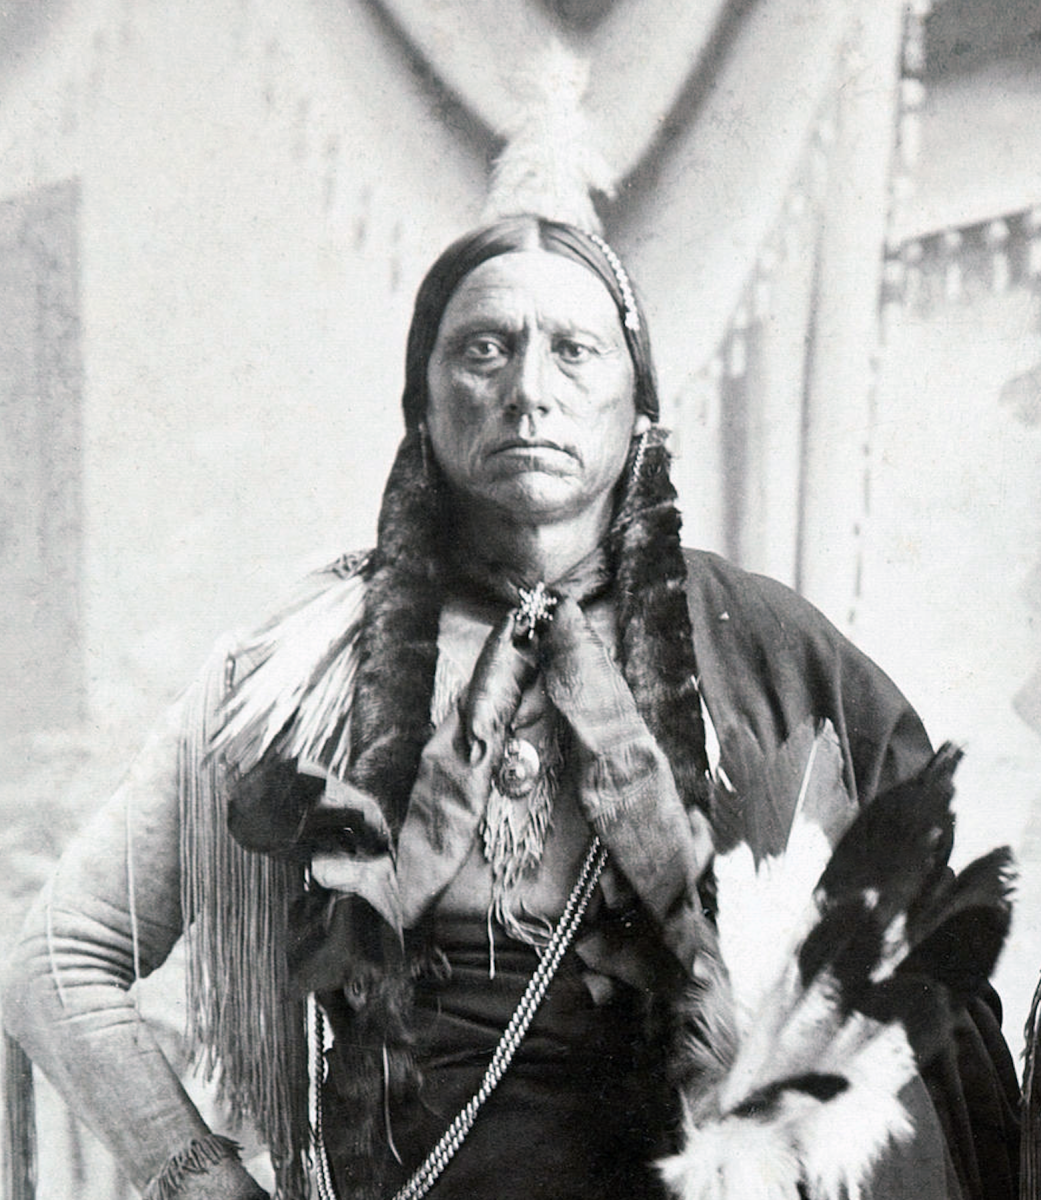 Man with long braided hair in traditional comanche outfit